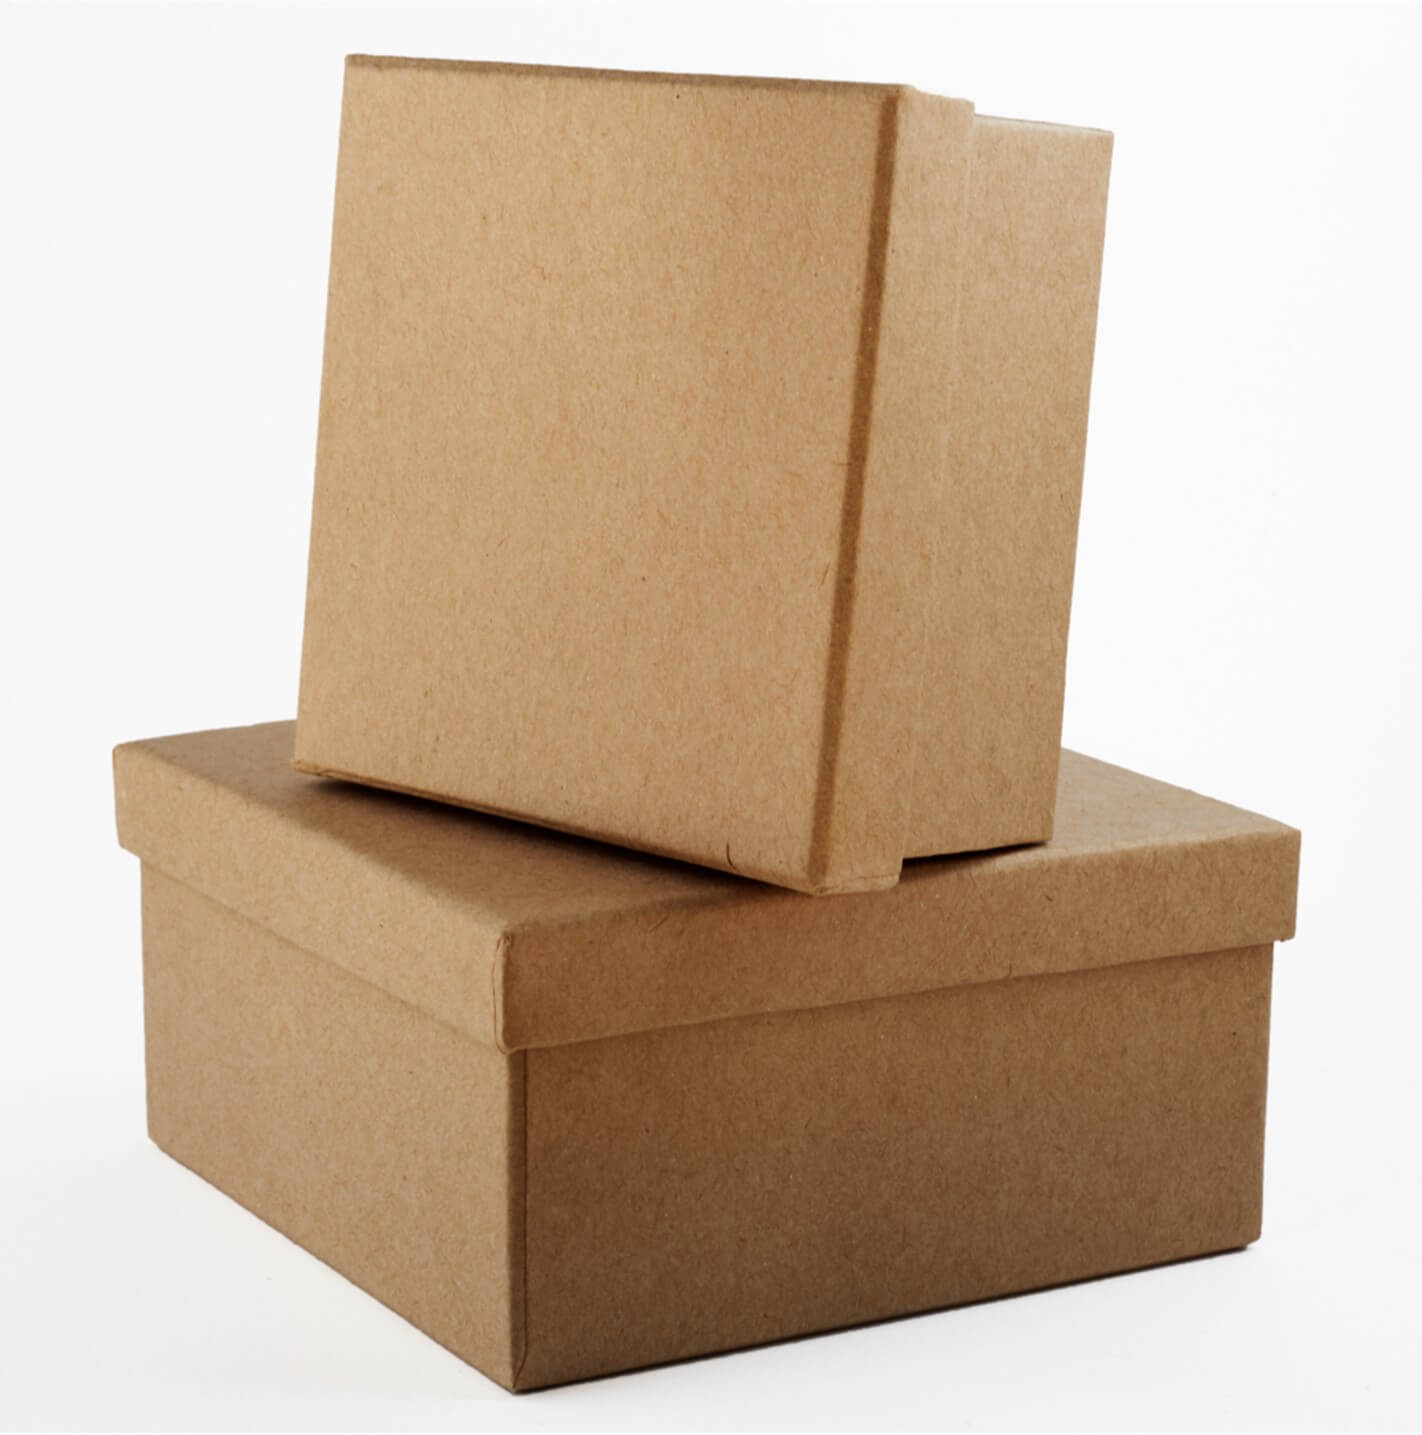 An image of two lid and base boxes.